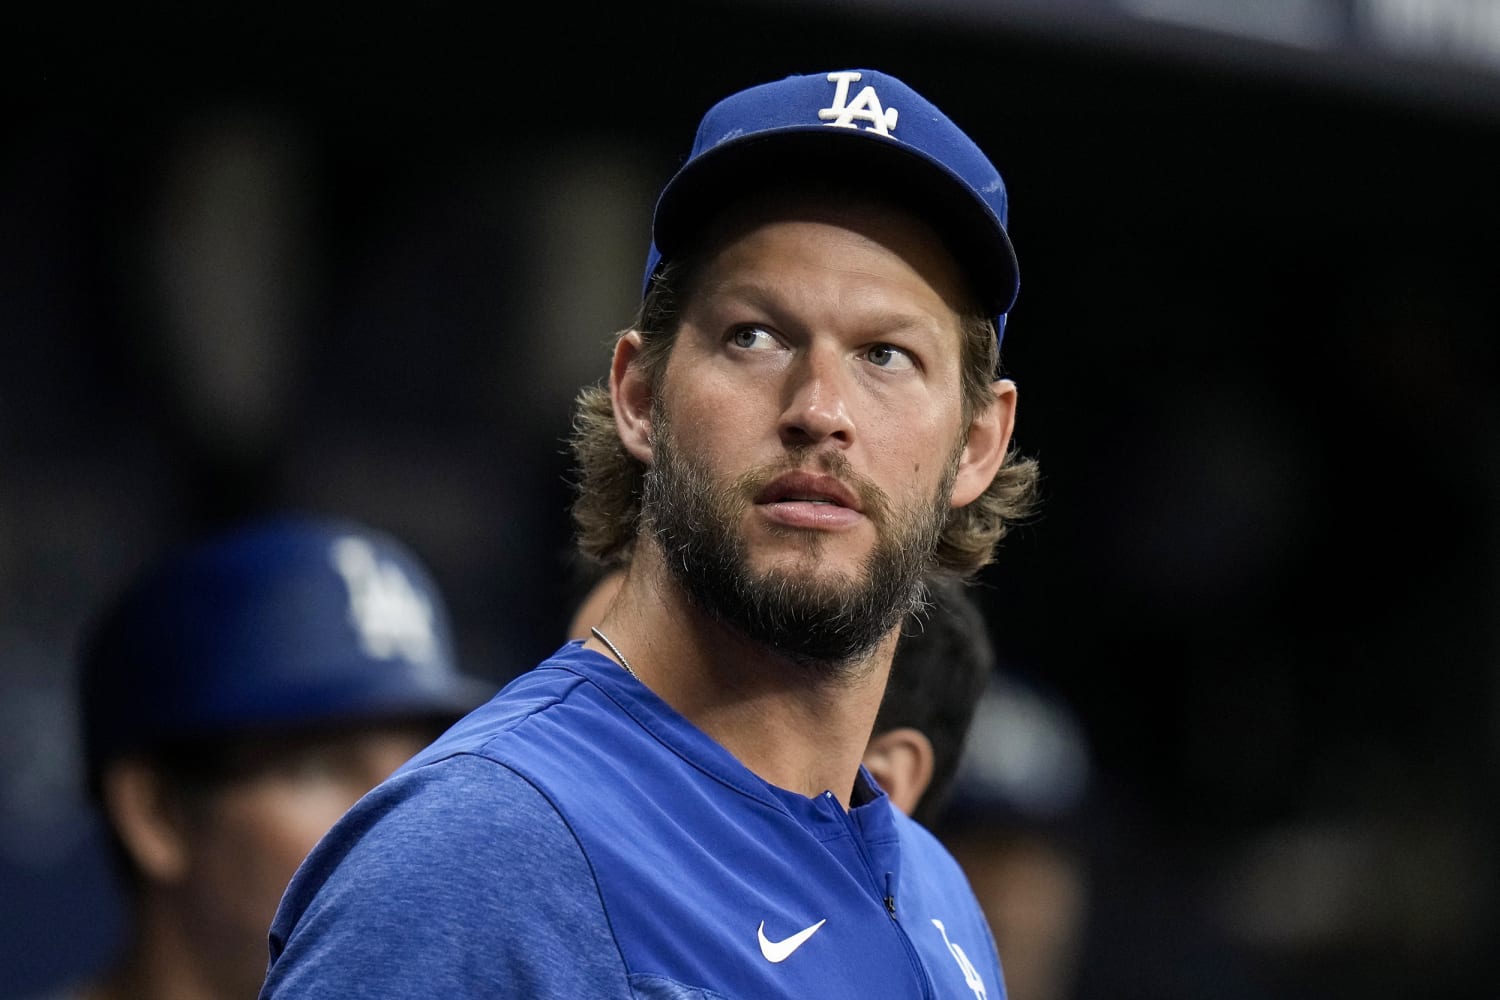 Clayton Kershaw All-Star Game MLB Jerseys for sale